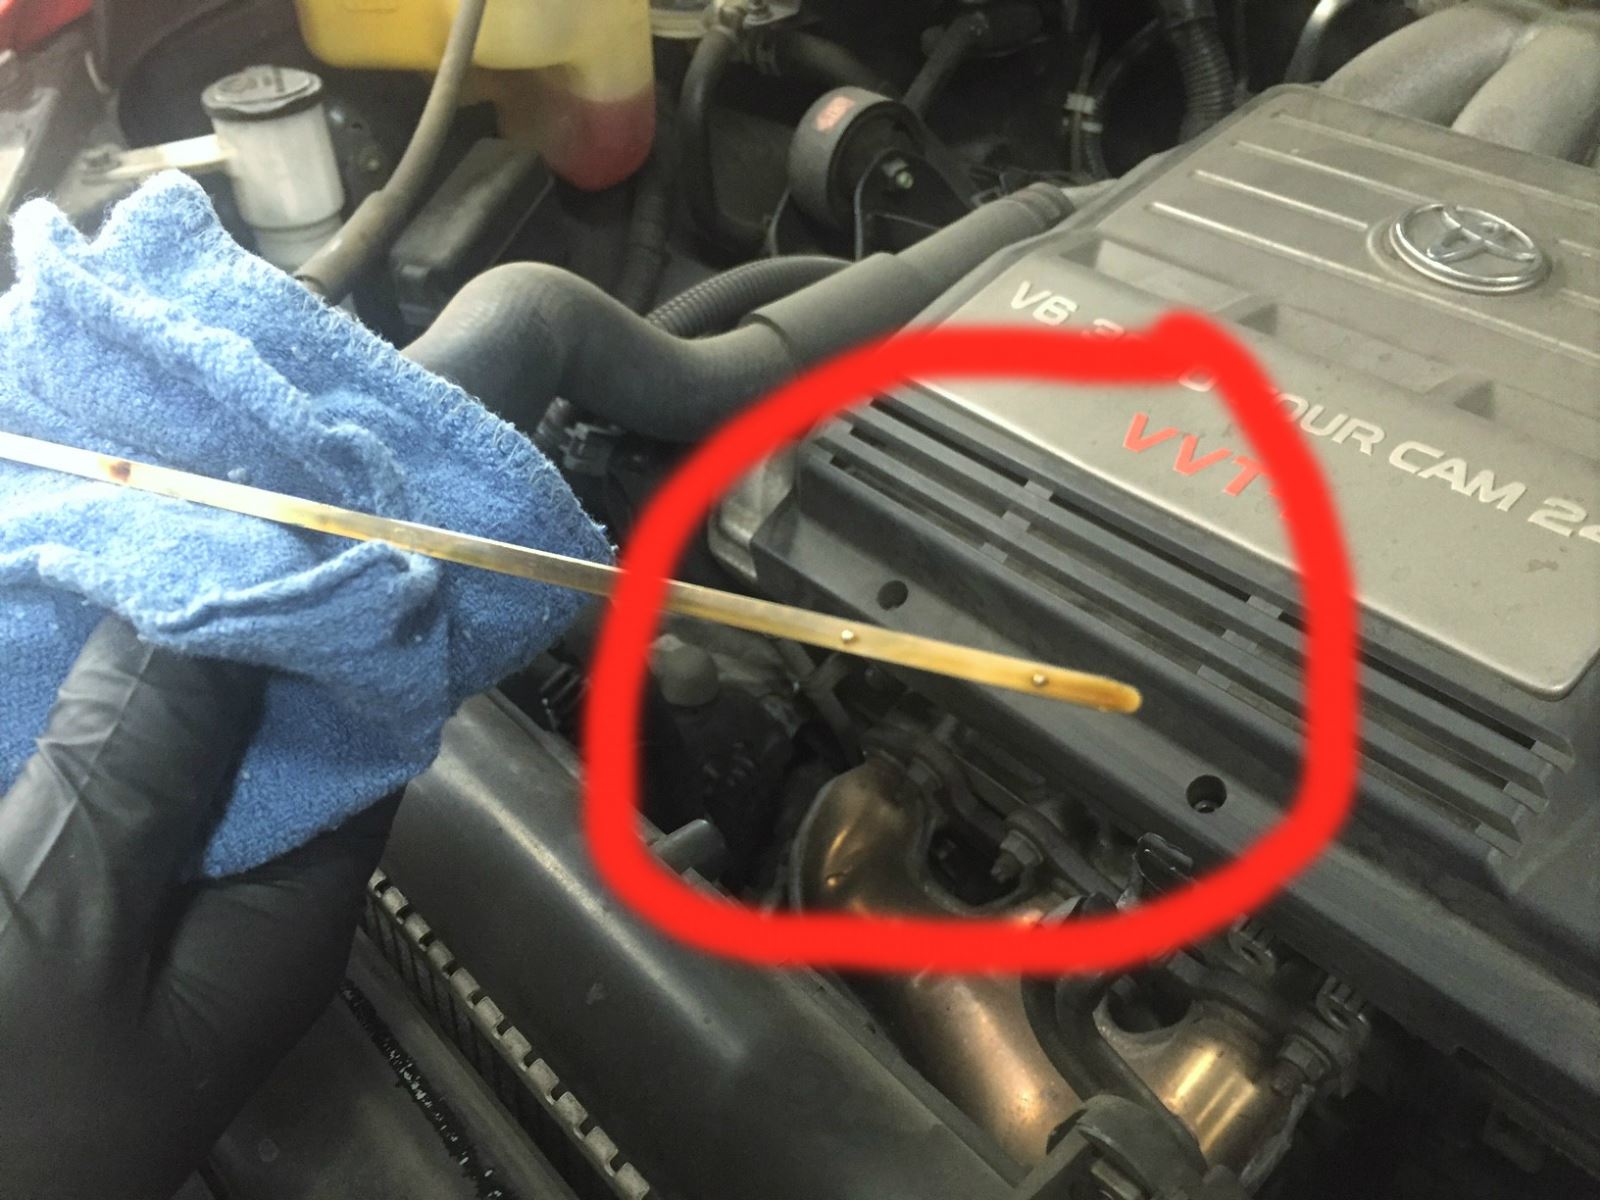 Look for the full and low mark on the engine oil dipstick